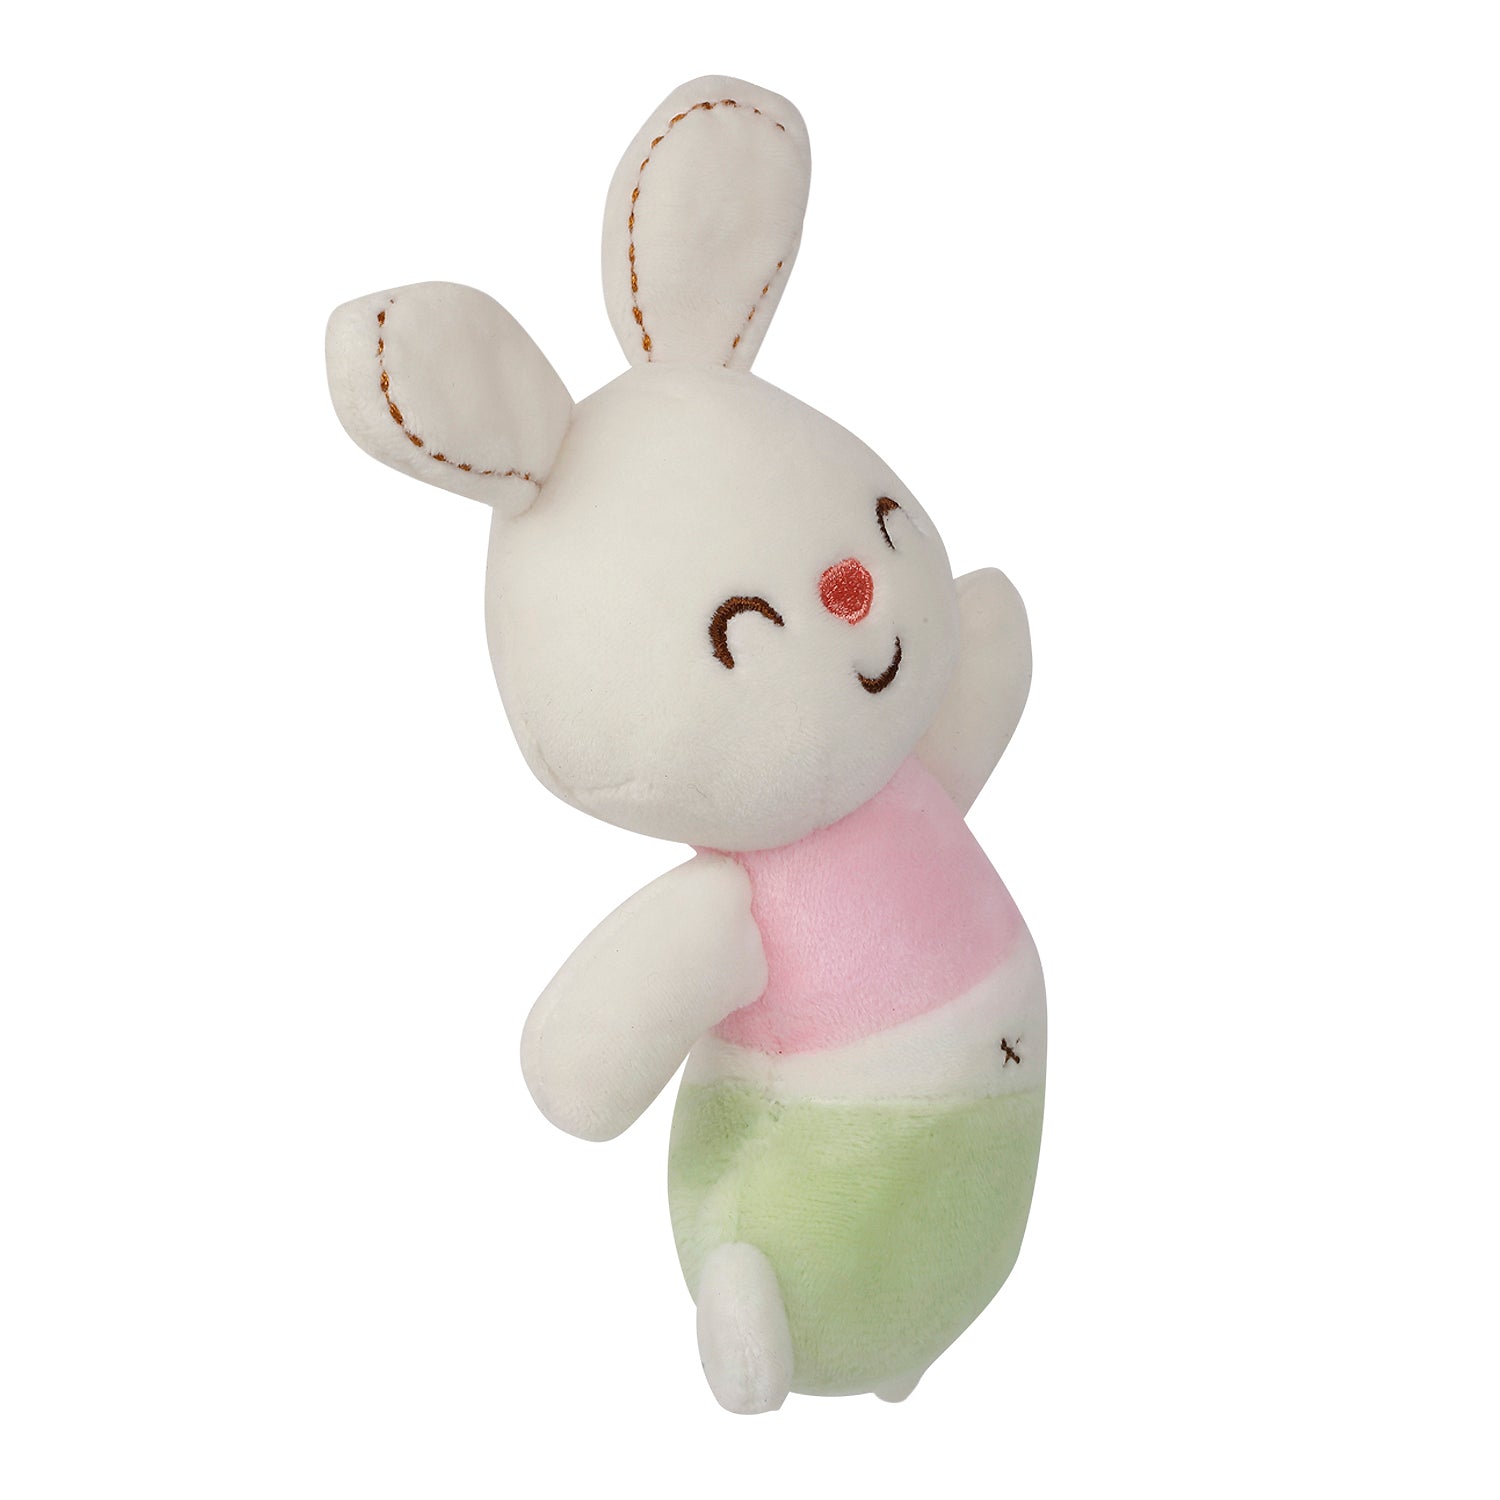 Hopping Bunny Pink Handheld Rattle Toy - Baby Moo